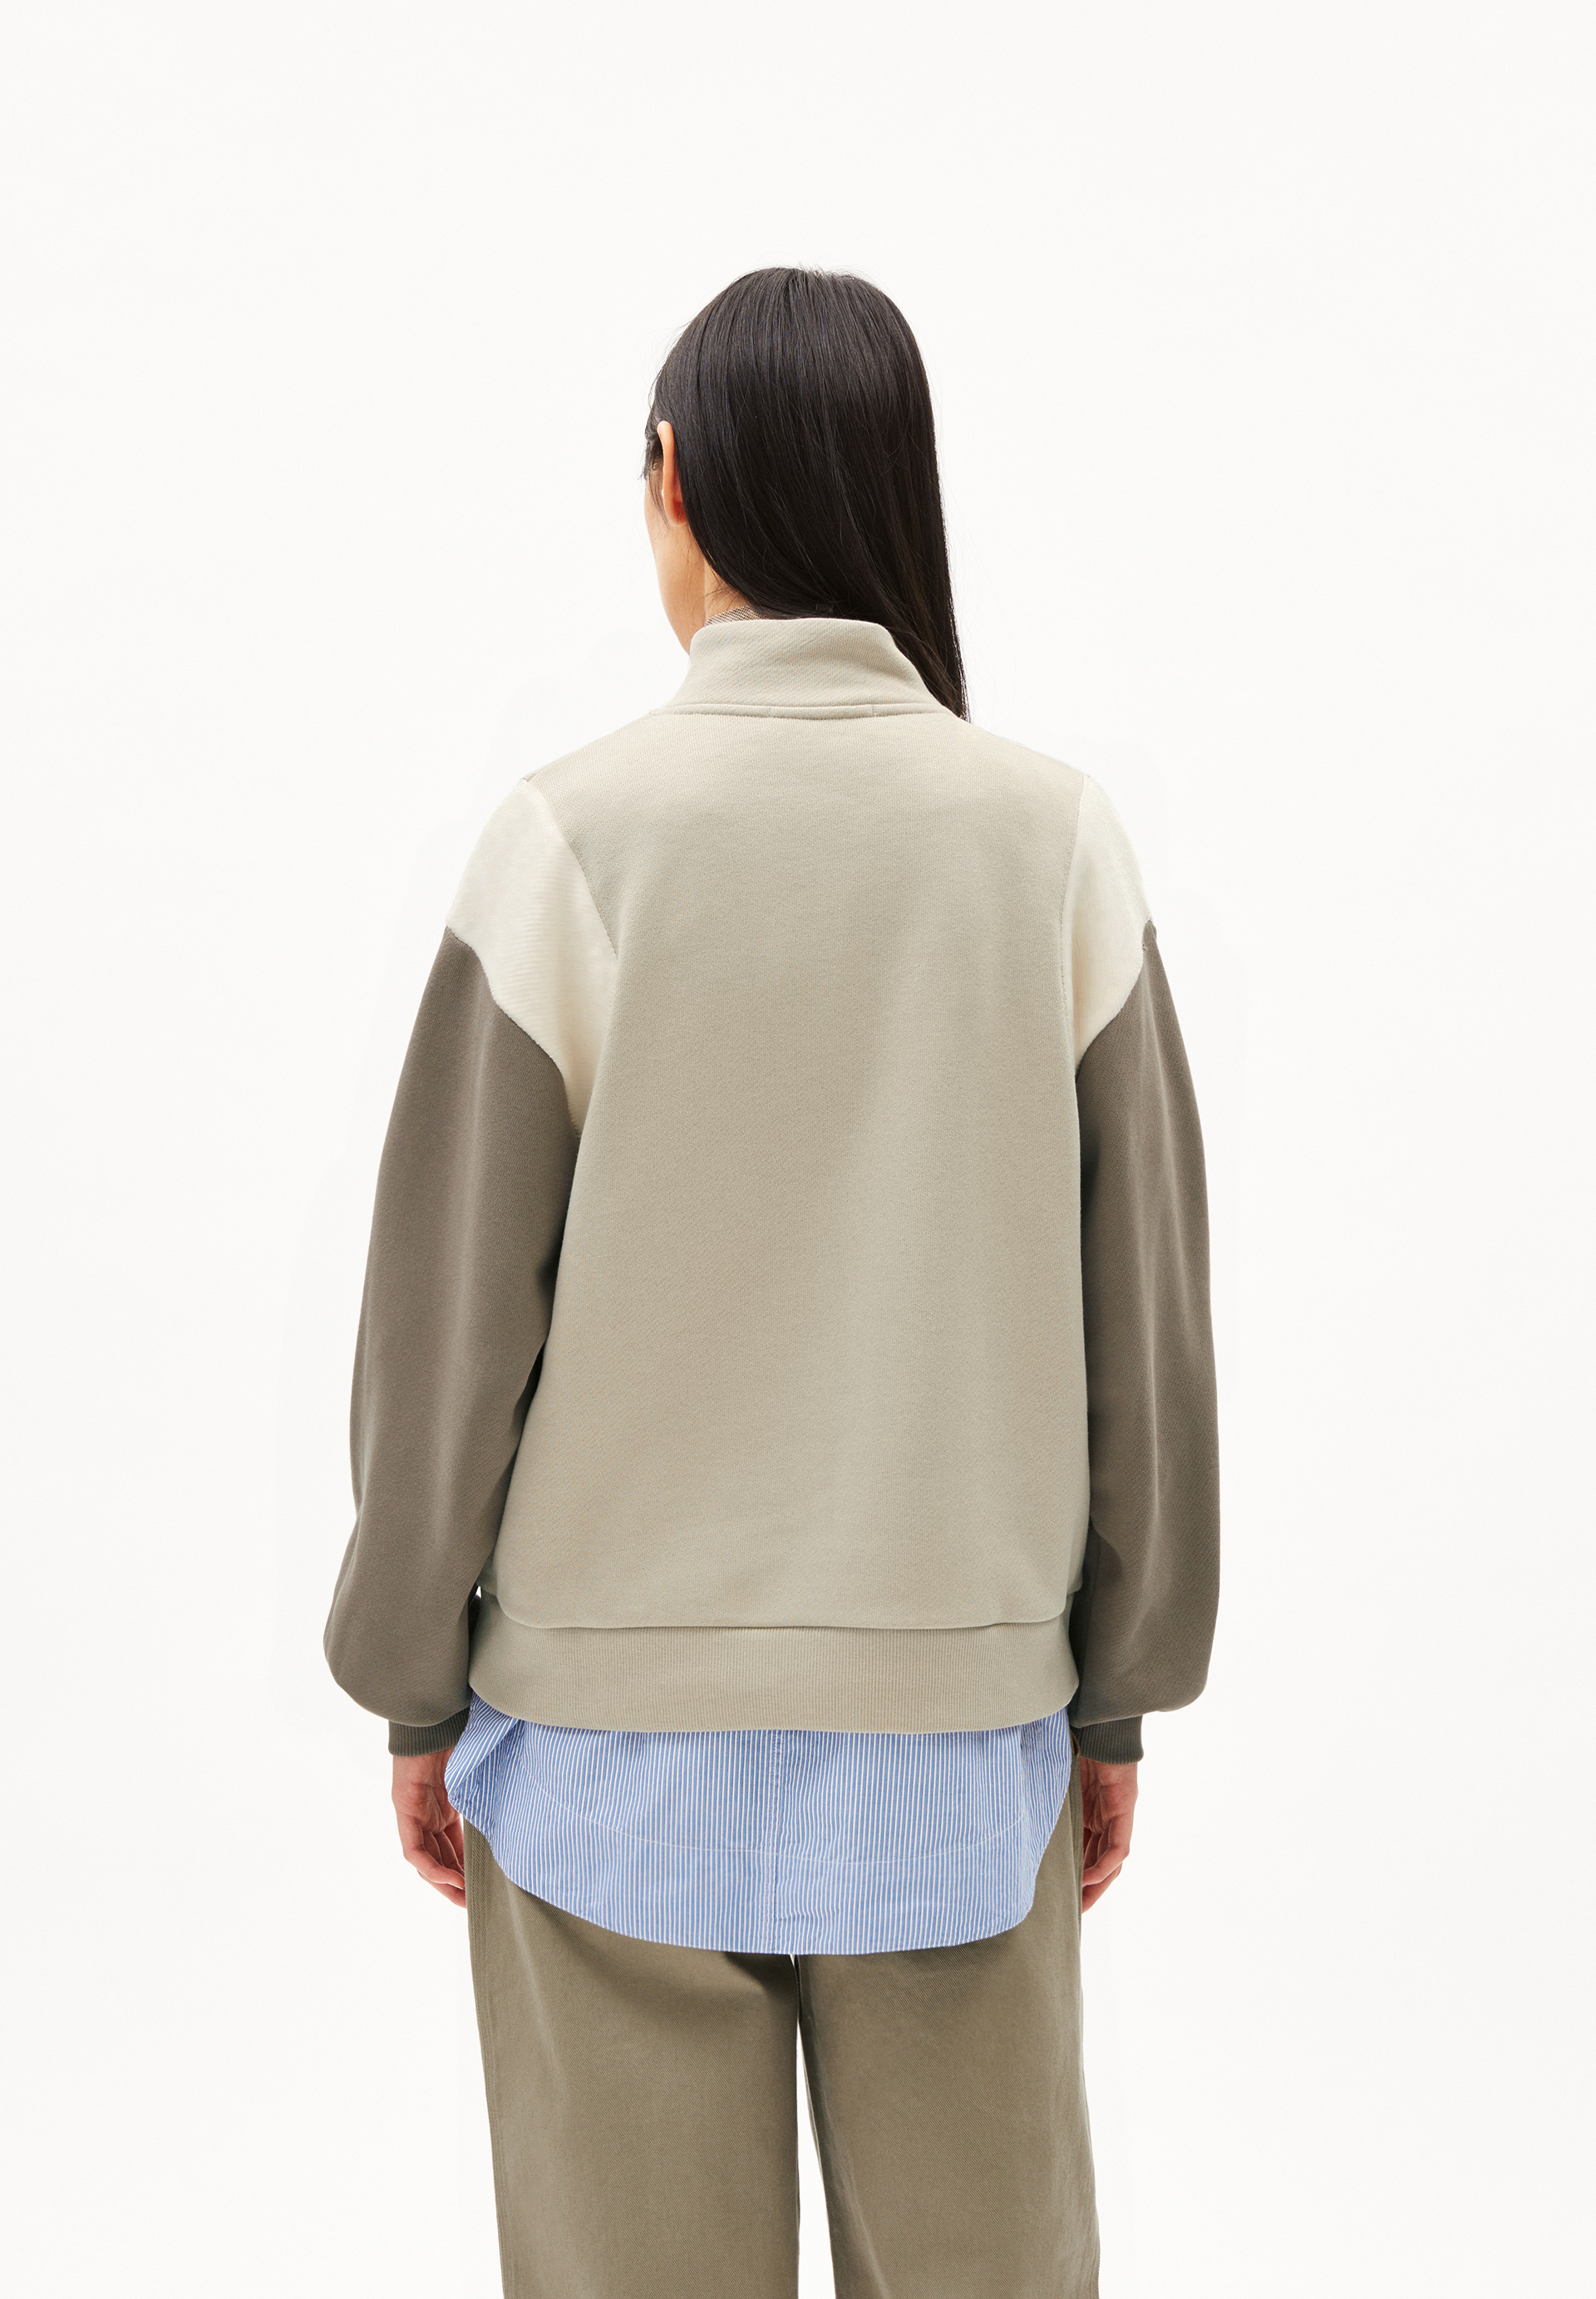 FRAAN CIS COLORBLOCK Sweatshirt Relaxed Fit made of Organic Cotton